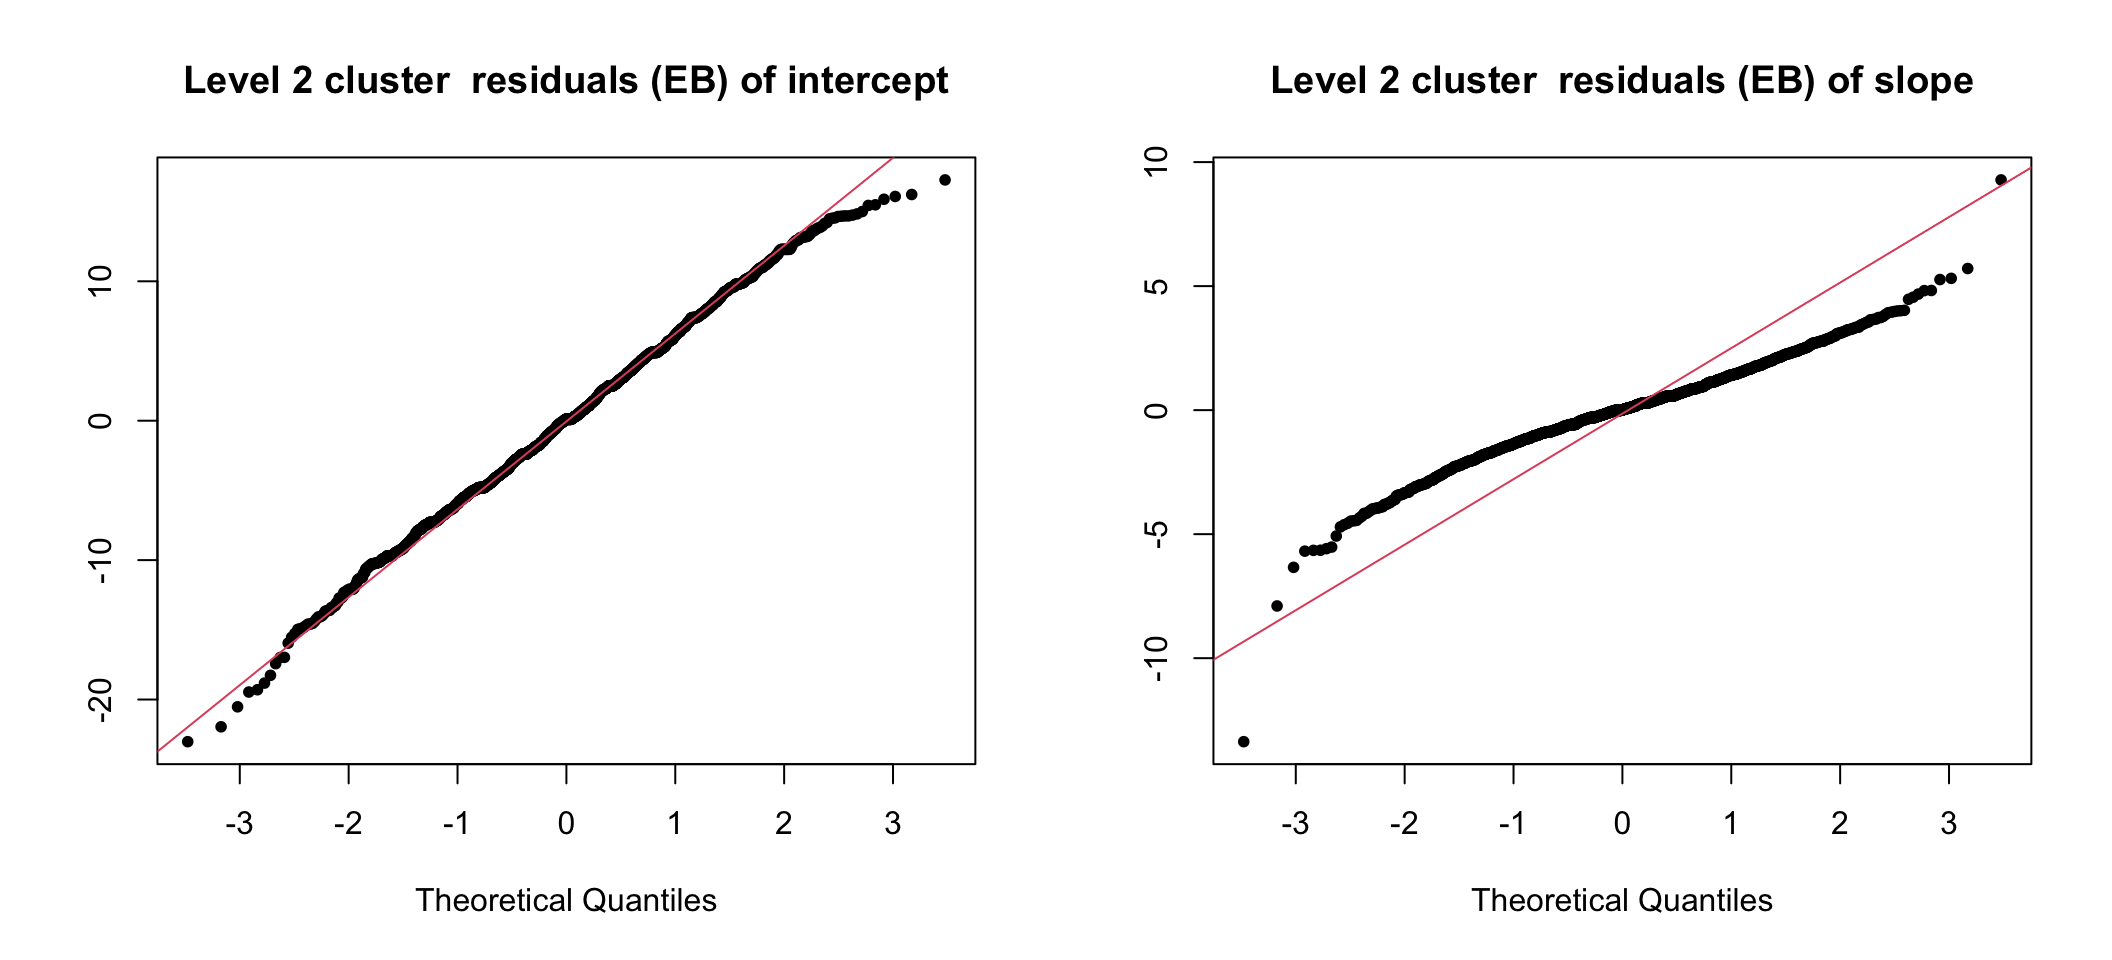 UN-Standardized cluster level residuals (intercept and slope) from the random intercept and slope model